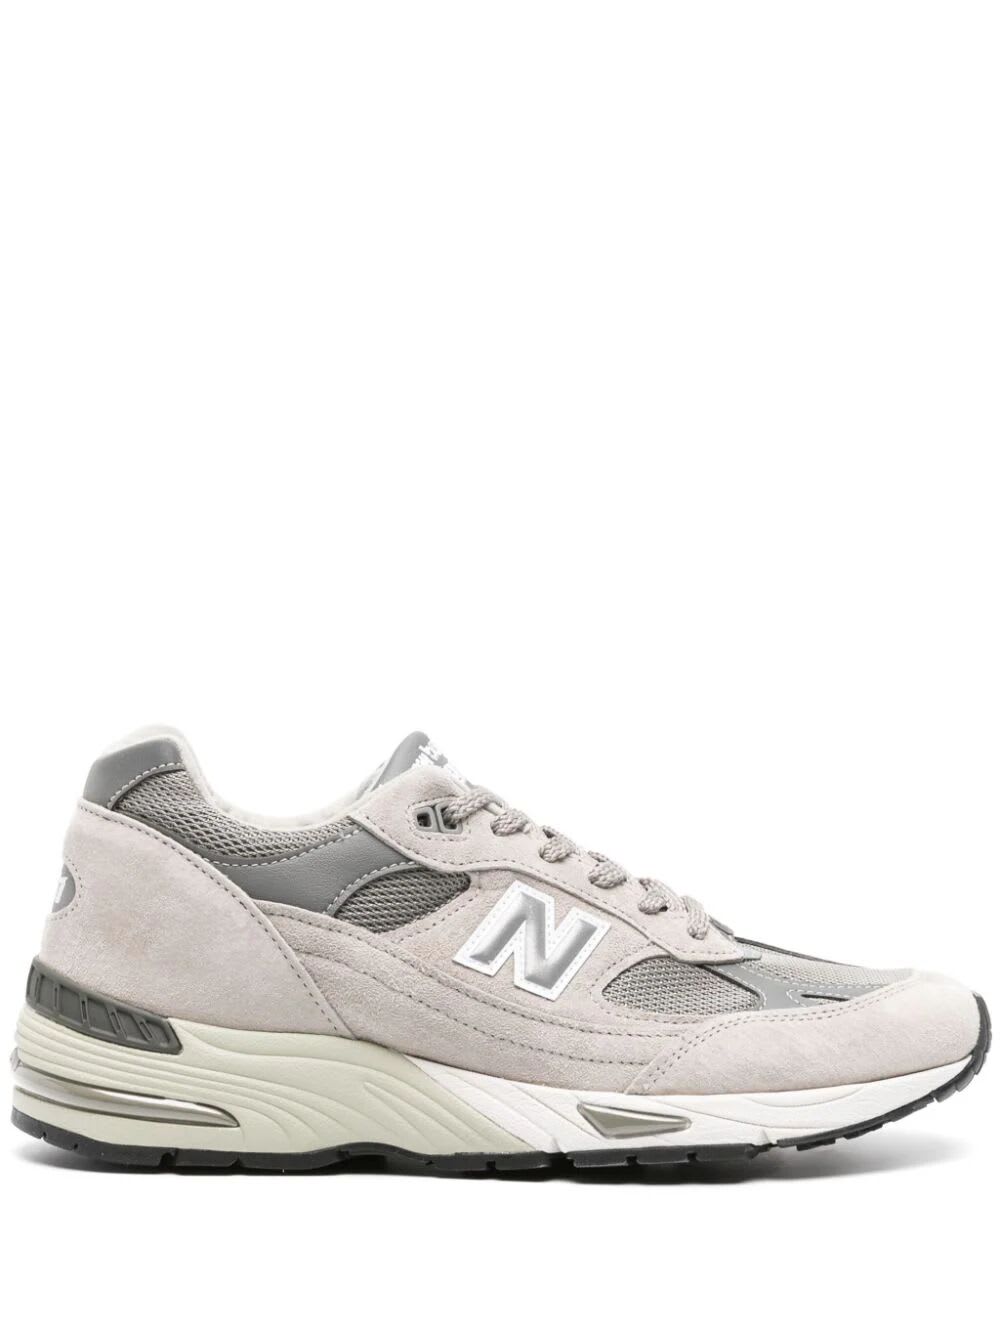 NEW BALANCE 991 LIFESTYLE SNEAKERS